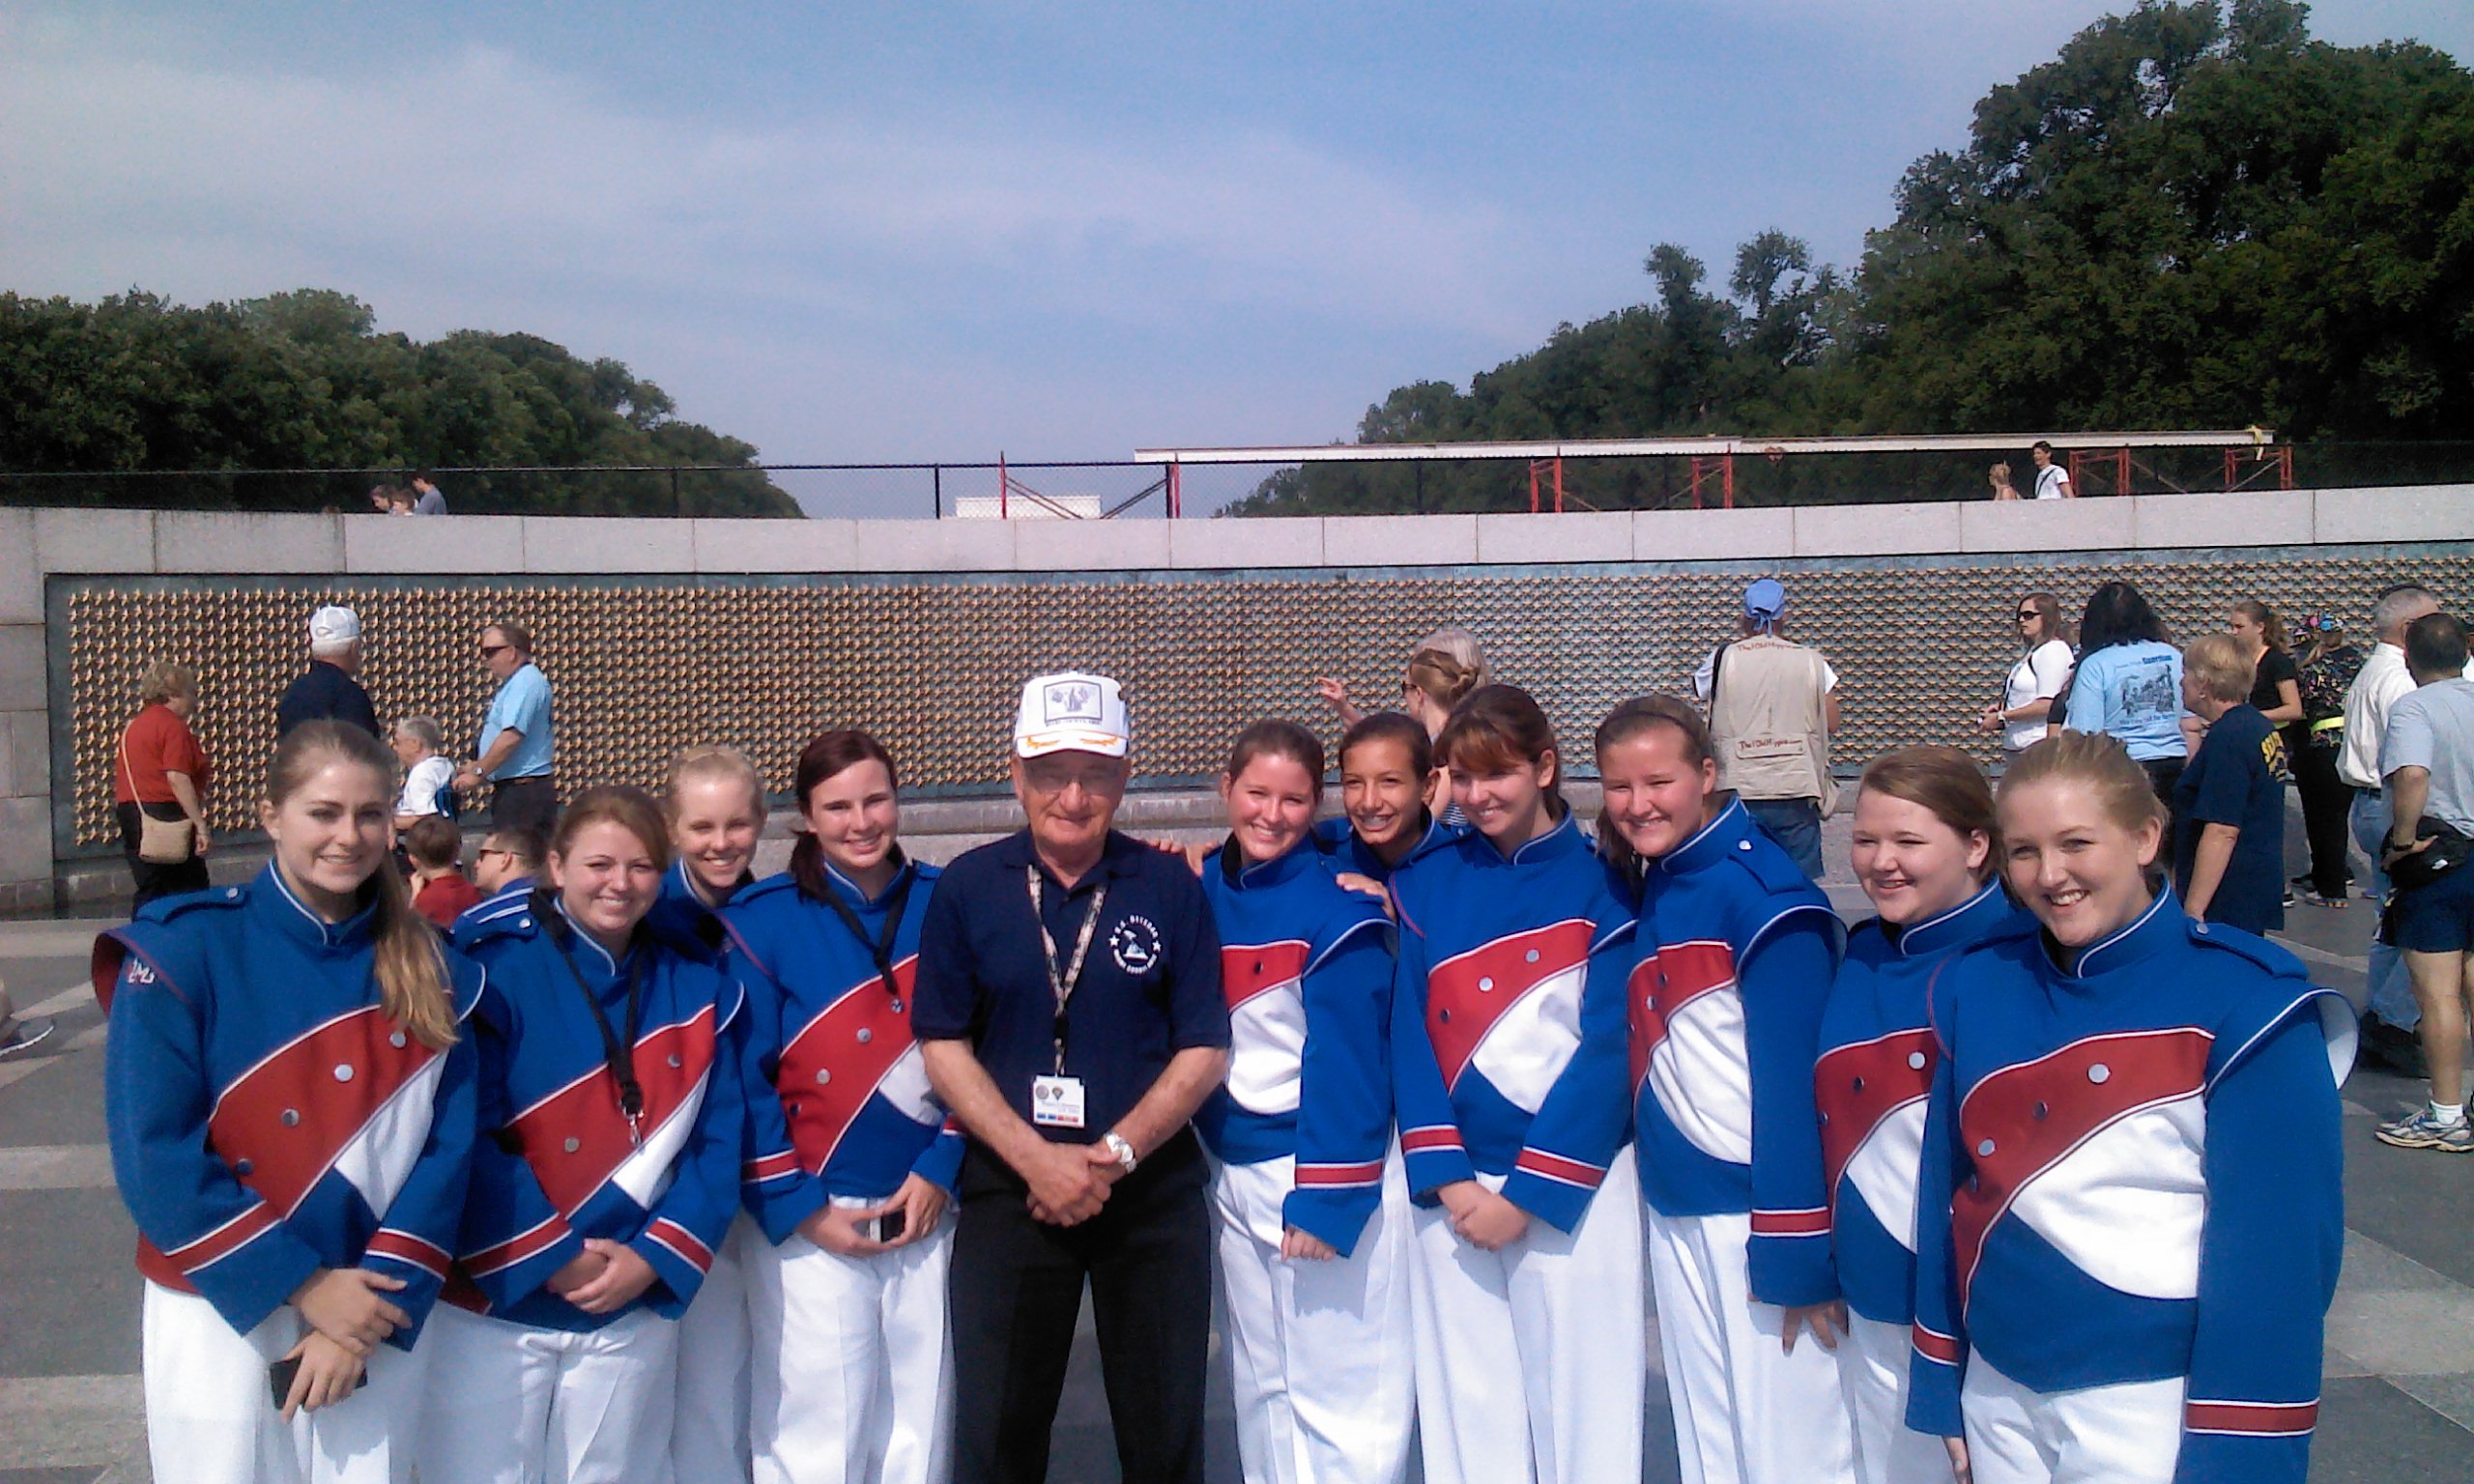 Girls in marching band uniforms posing in photo with WWII Veteran